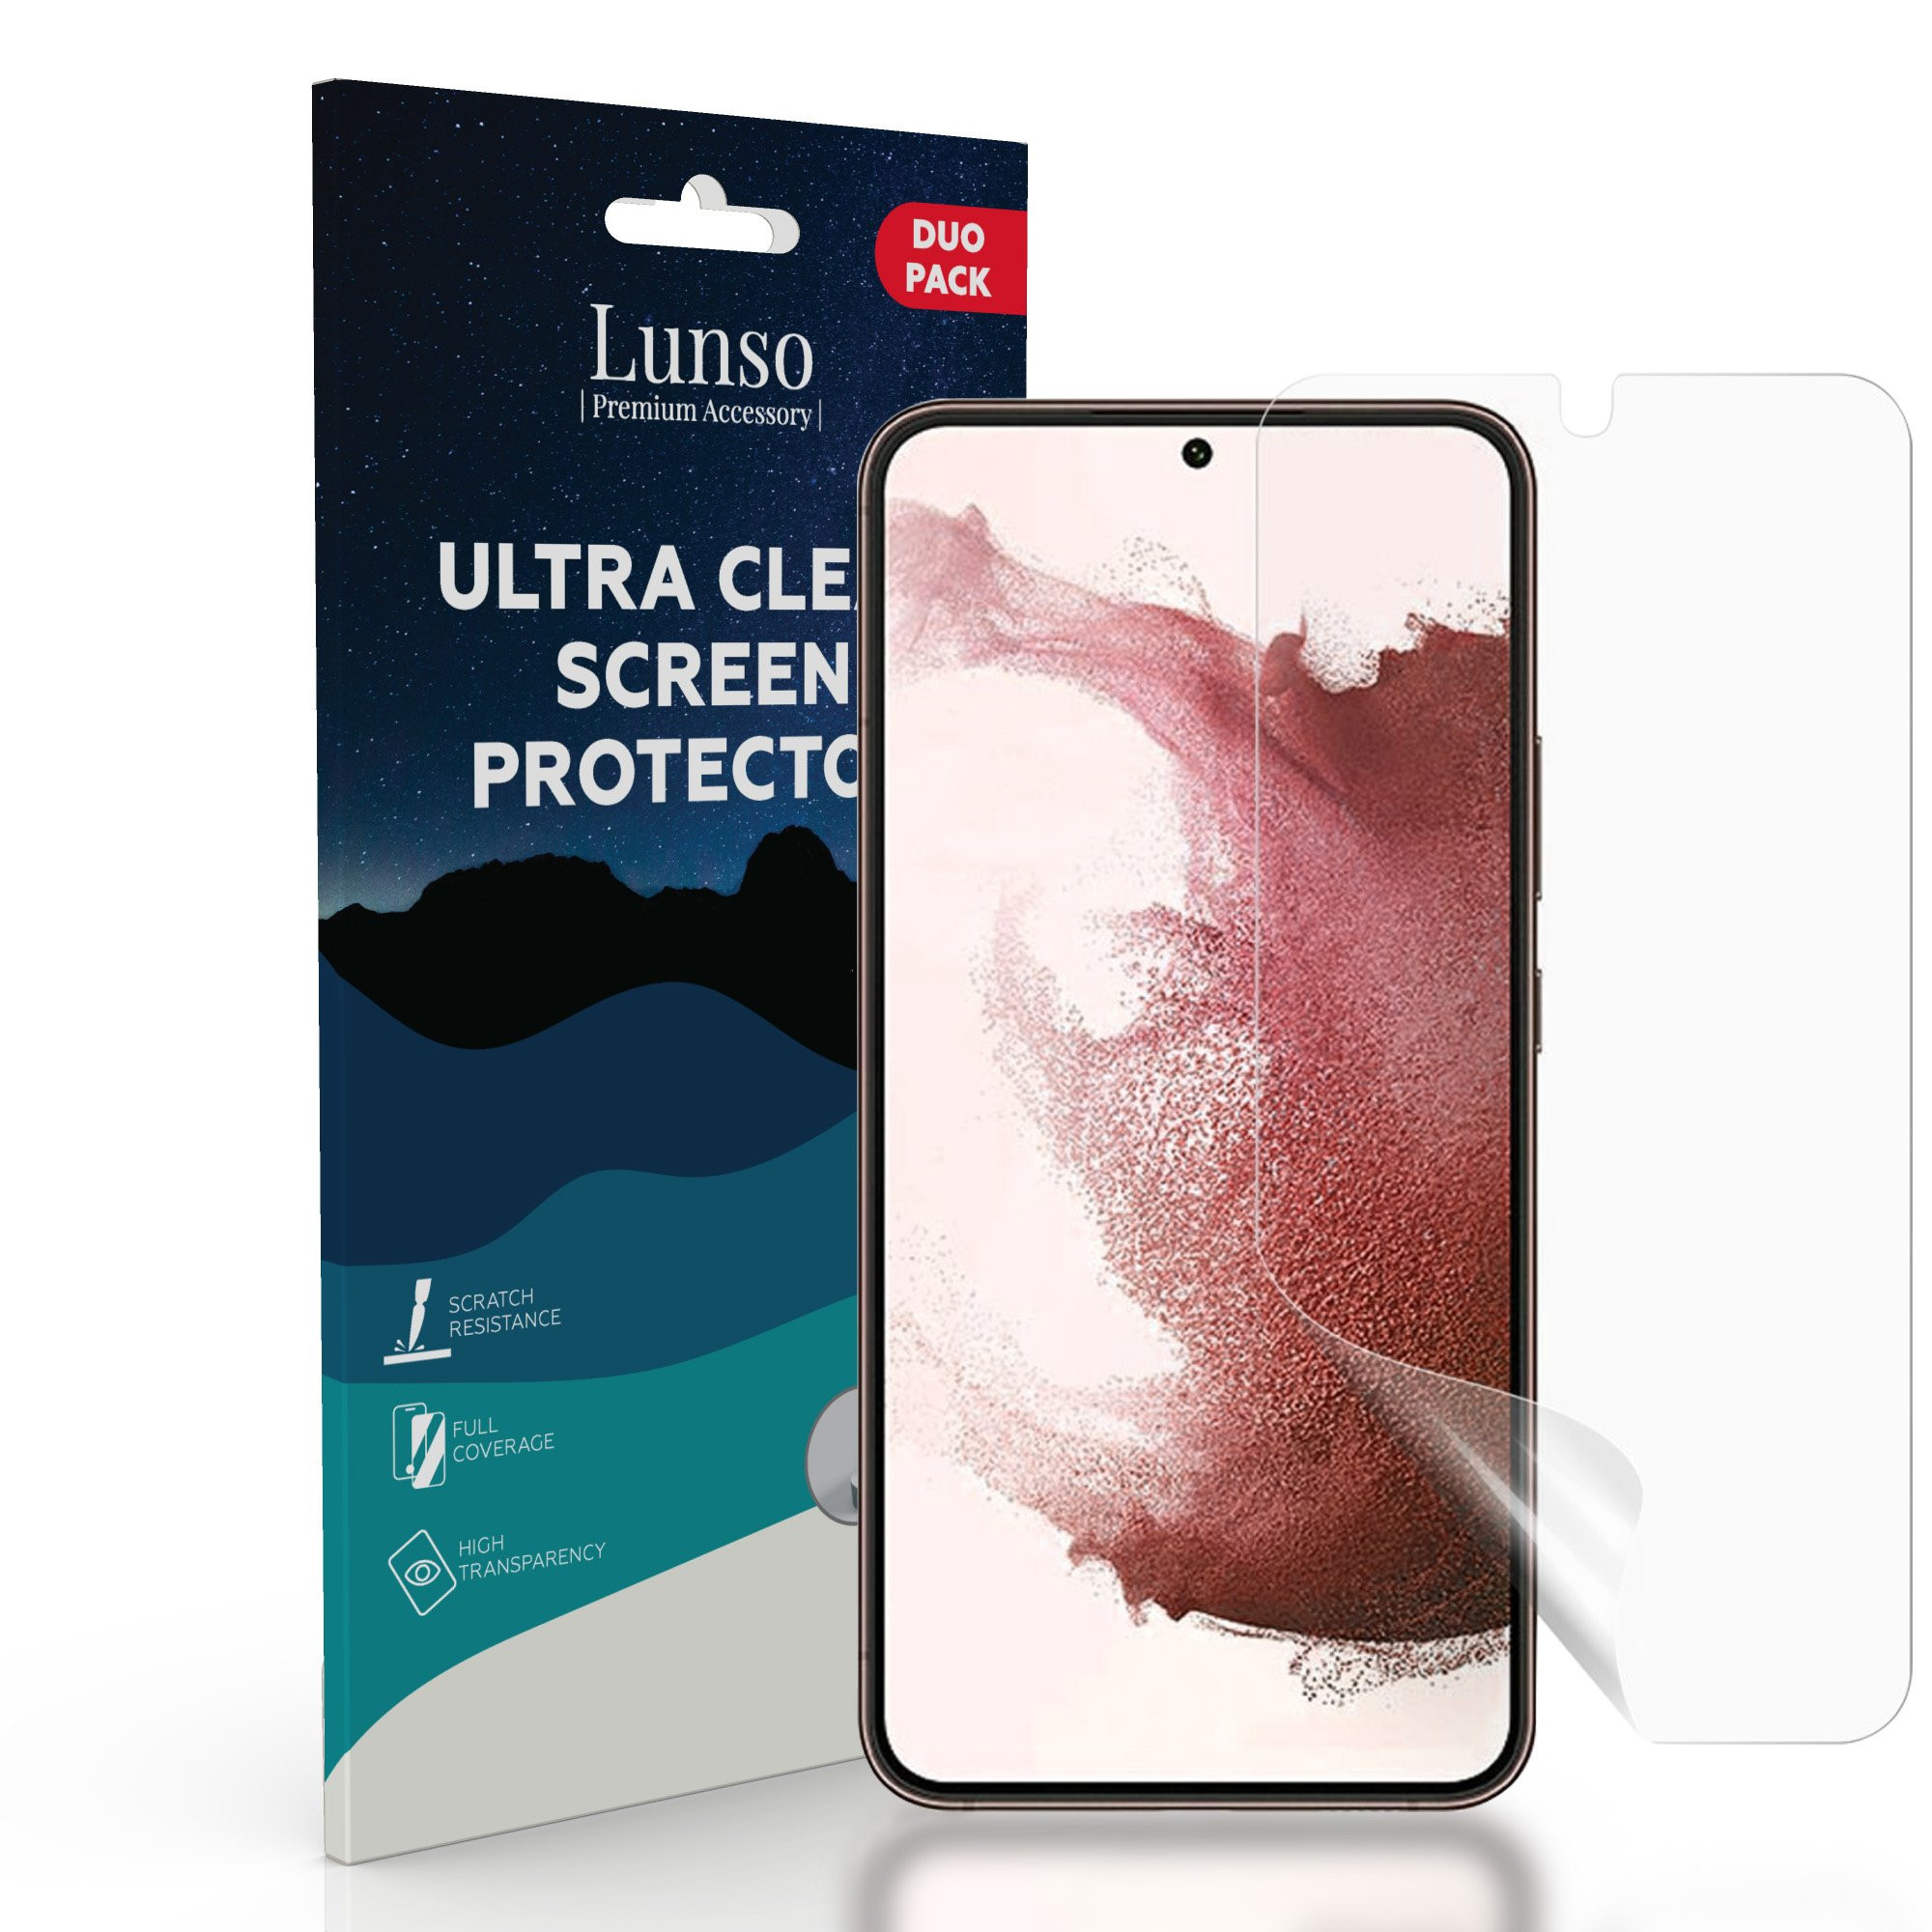 Lunso - Duo Pack (2 stuks) Beschermfolie - Full Cover Screen Protector - Samsung Galaxy S22 Plus